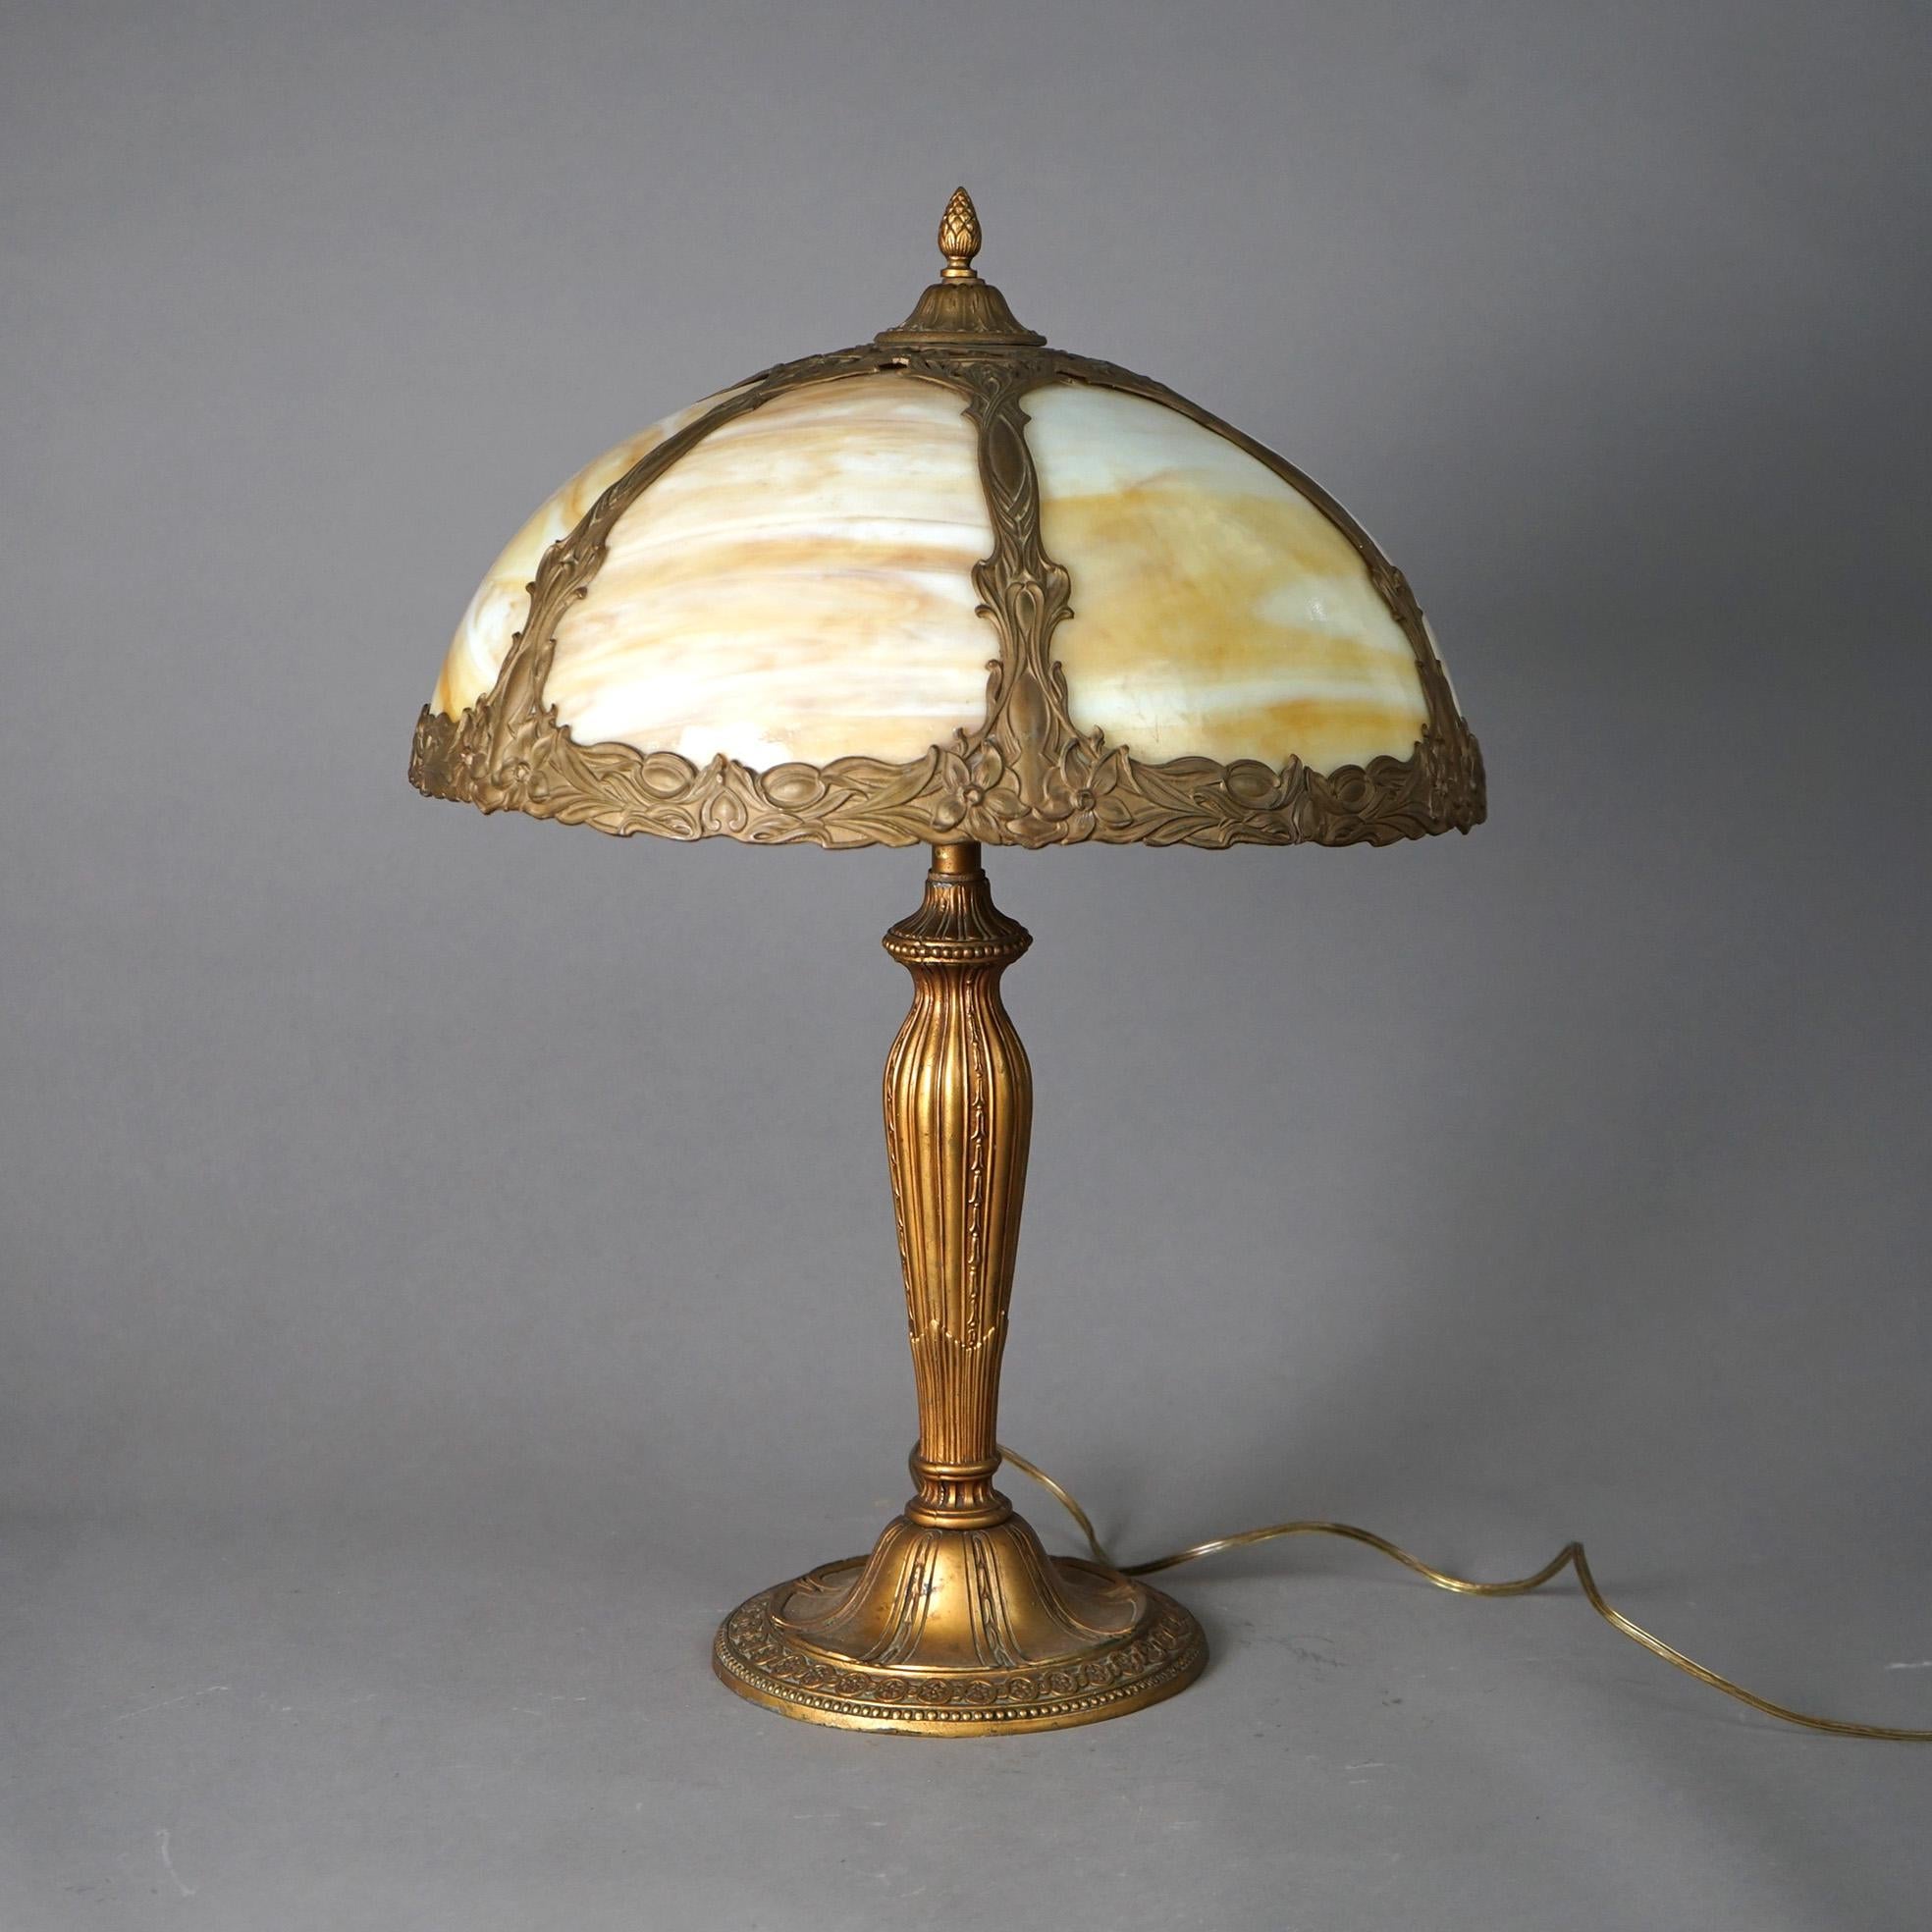 An antique Arts and Crafts table lamp by Bradley and Hubbard offers foliate cast dome form shade housing bent slag glass panels over double socket base, c1920

Measures - 22.5